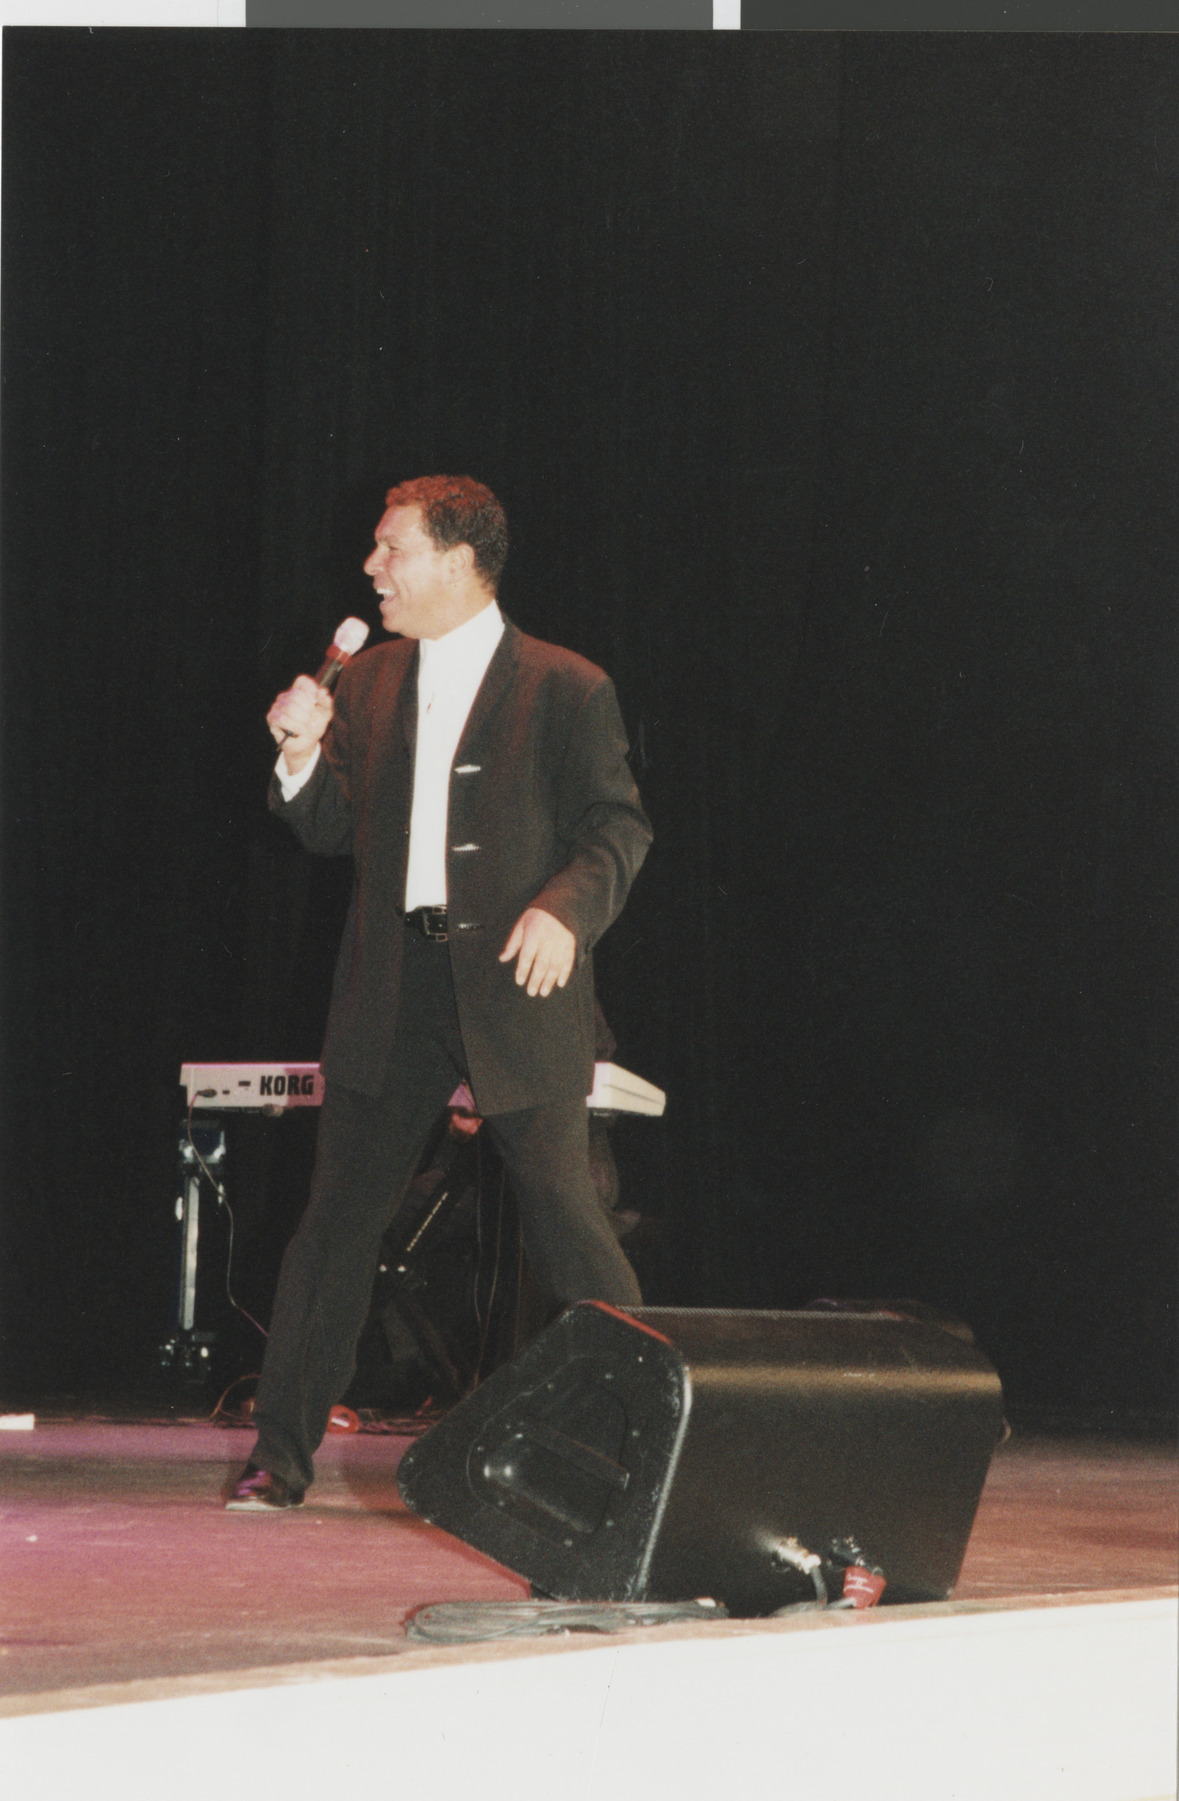 Photograph of Pacesetter Celebrity Dinner event, March 3, 2002